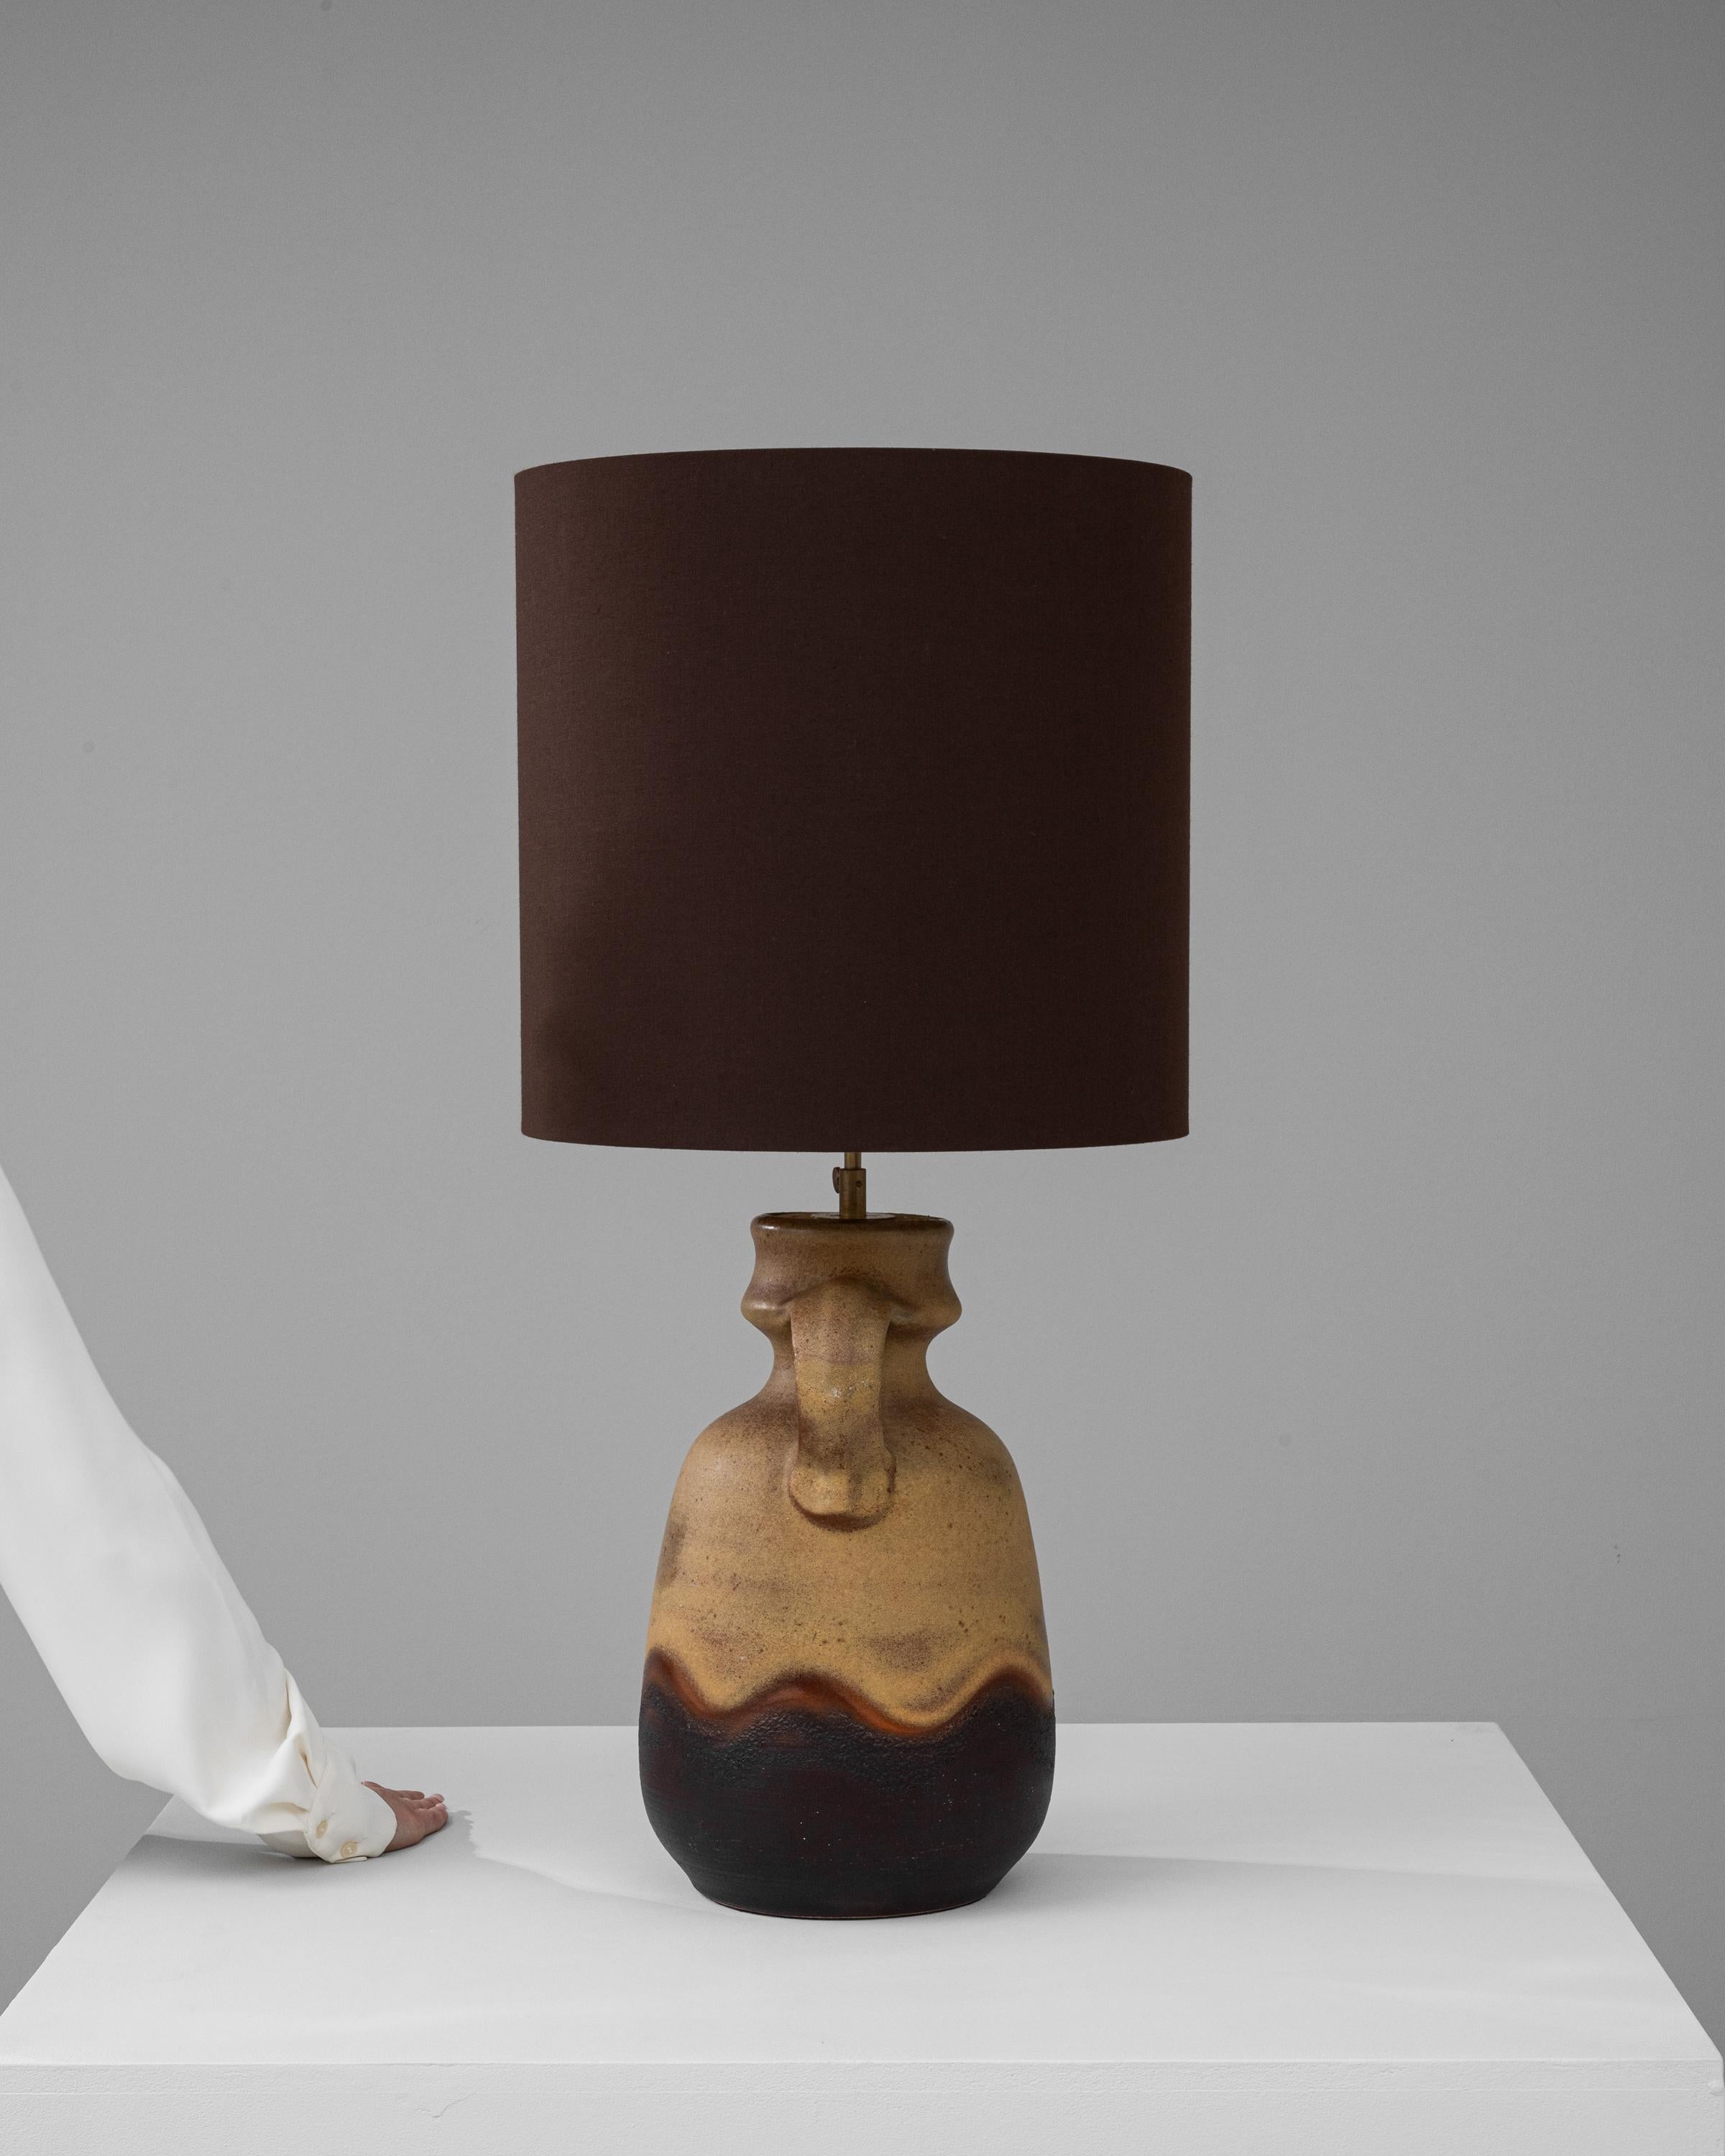 This 20th Century German Ceramic Table Lamp exudes a rustic charm that harkens back to a simpler time. The stout, earthenware base boasts a distinctive handle-like protrusion, a homage to traditional pottery forms, while a rich, earth-toned glaze